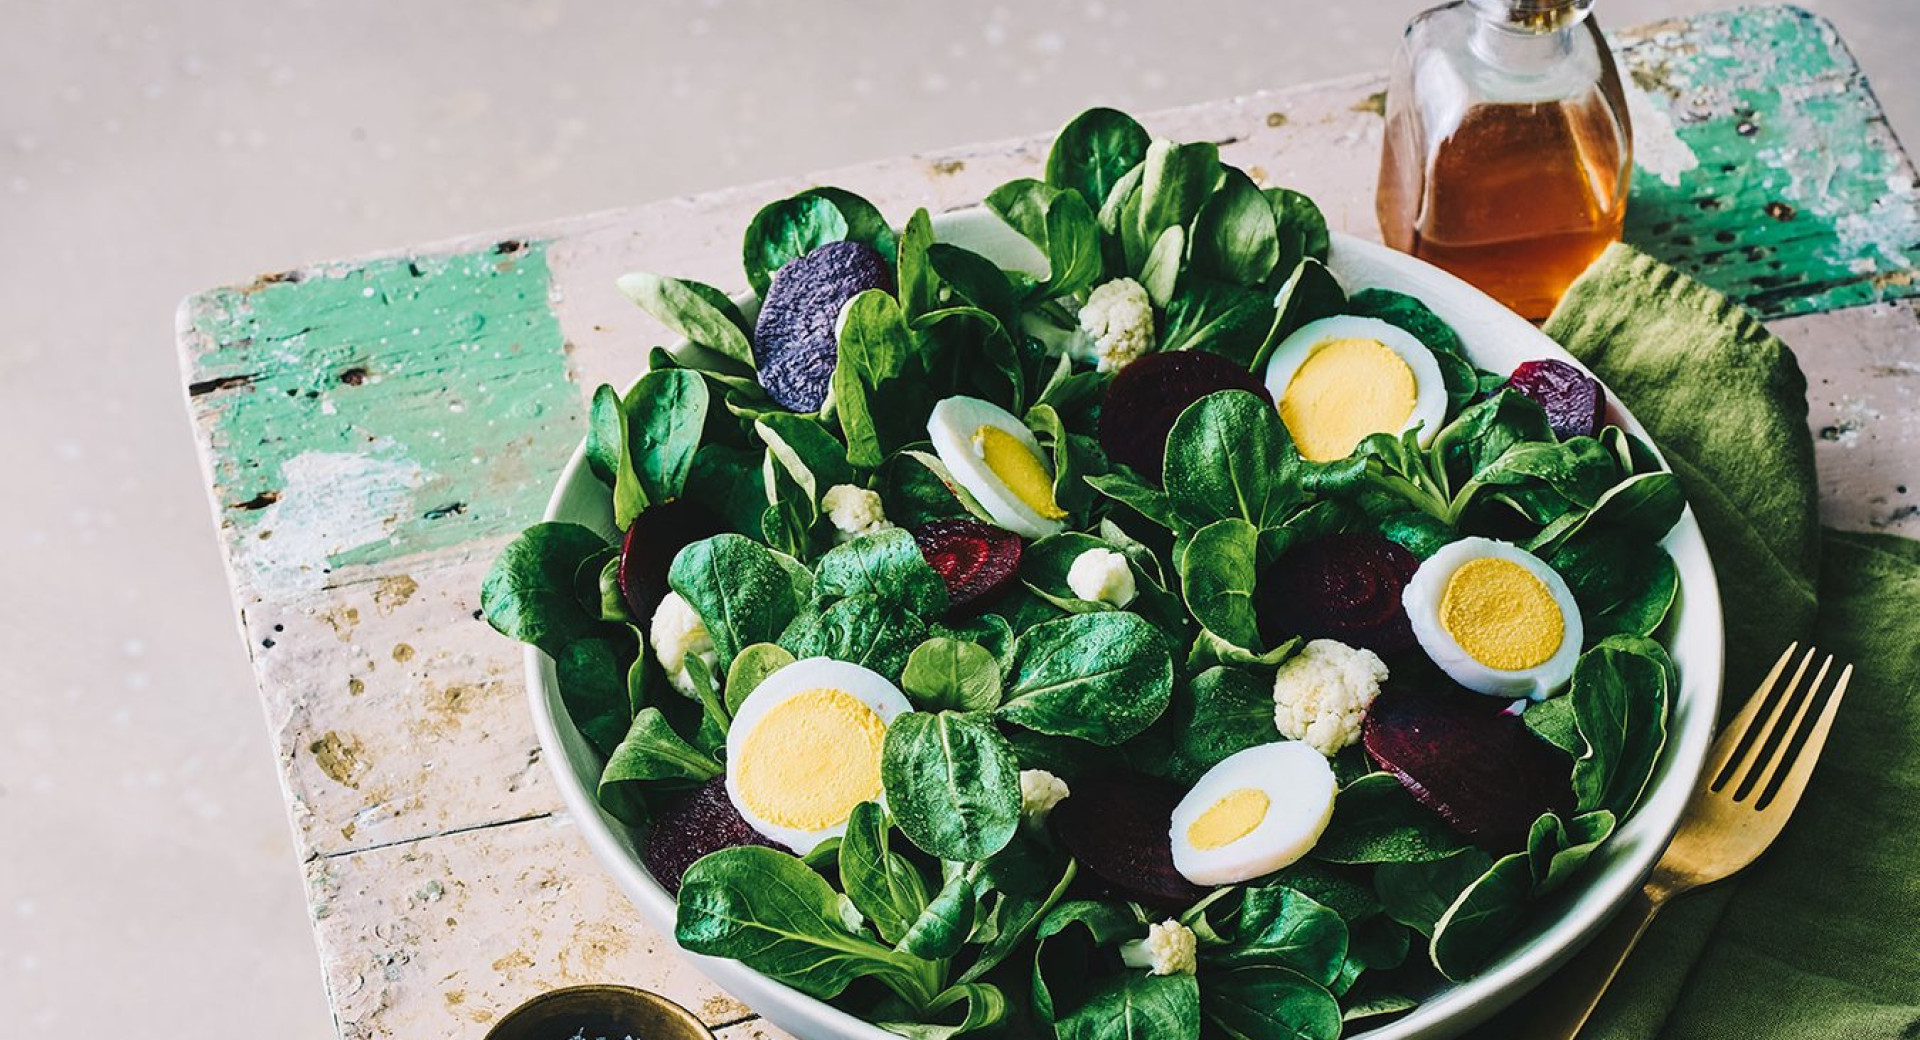 A bowl of dandelion salad with hard-boiled eggs on a wooden board, white background.